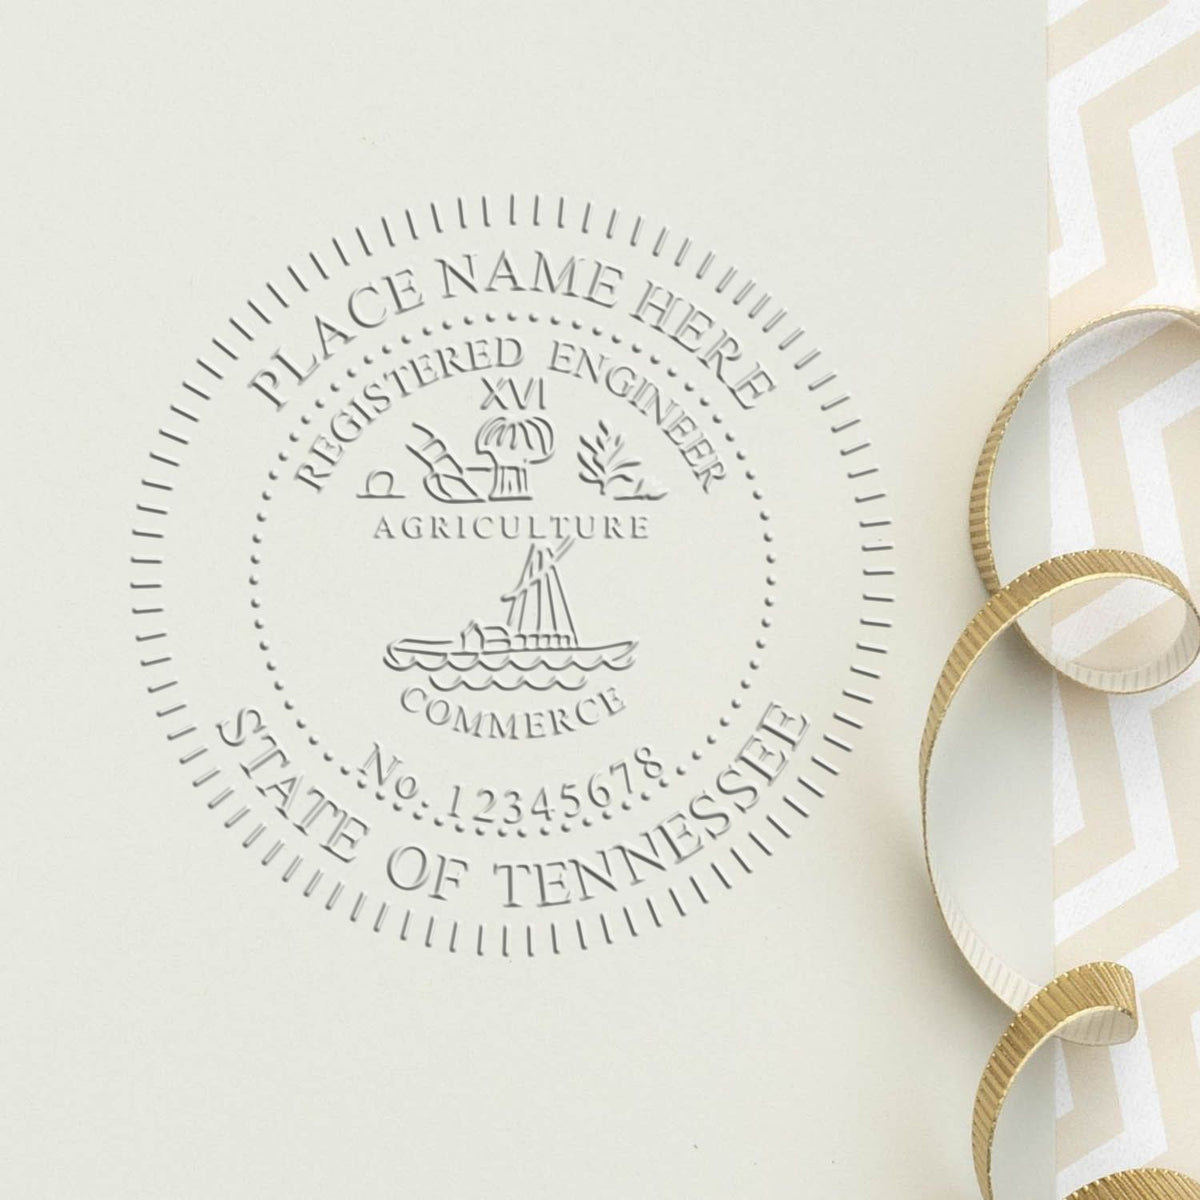 The Gift Tennessee Engineer Seal stamp impression comes to life with a crisp, detailed image stamped on paper - showcasing true professional quality.